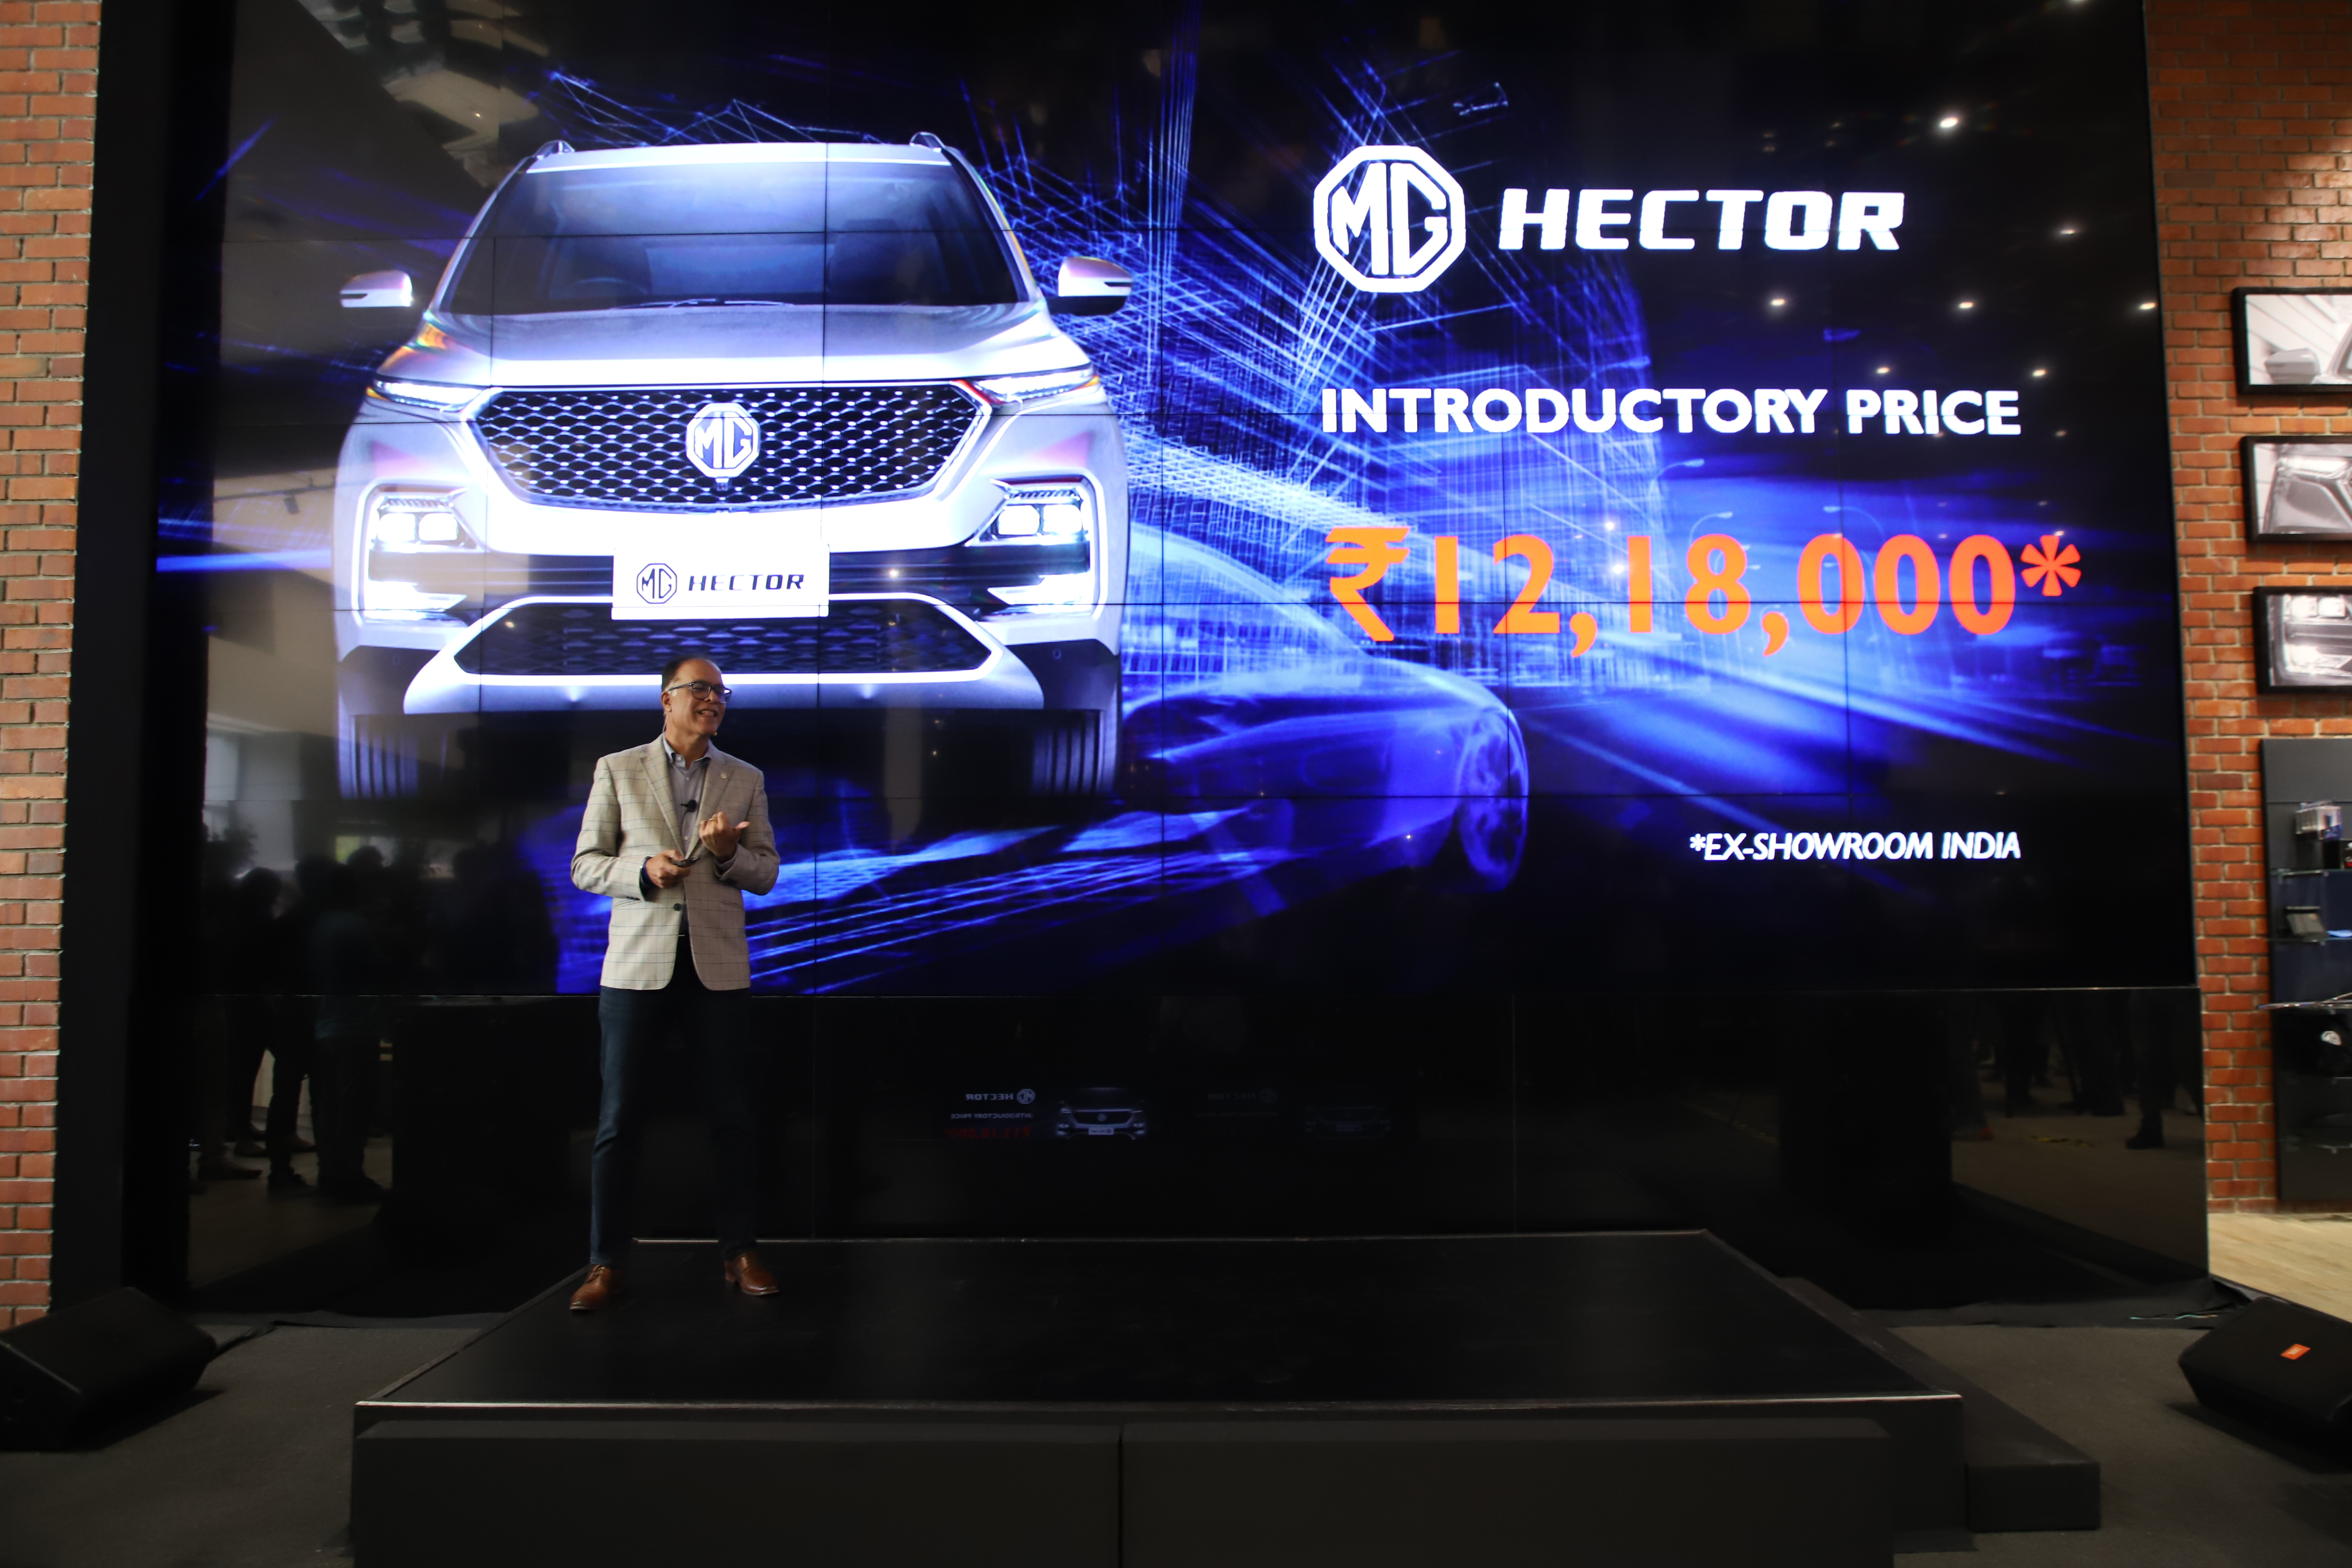 MG Hector launches industry’s first internet car at Rs 12.18 lakh